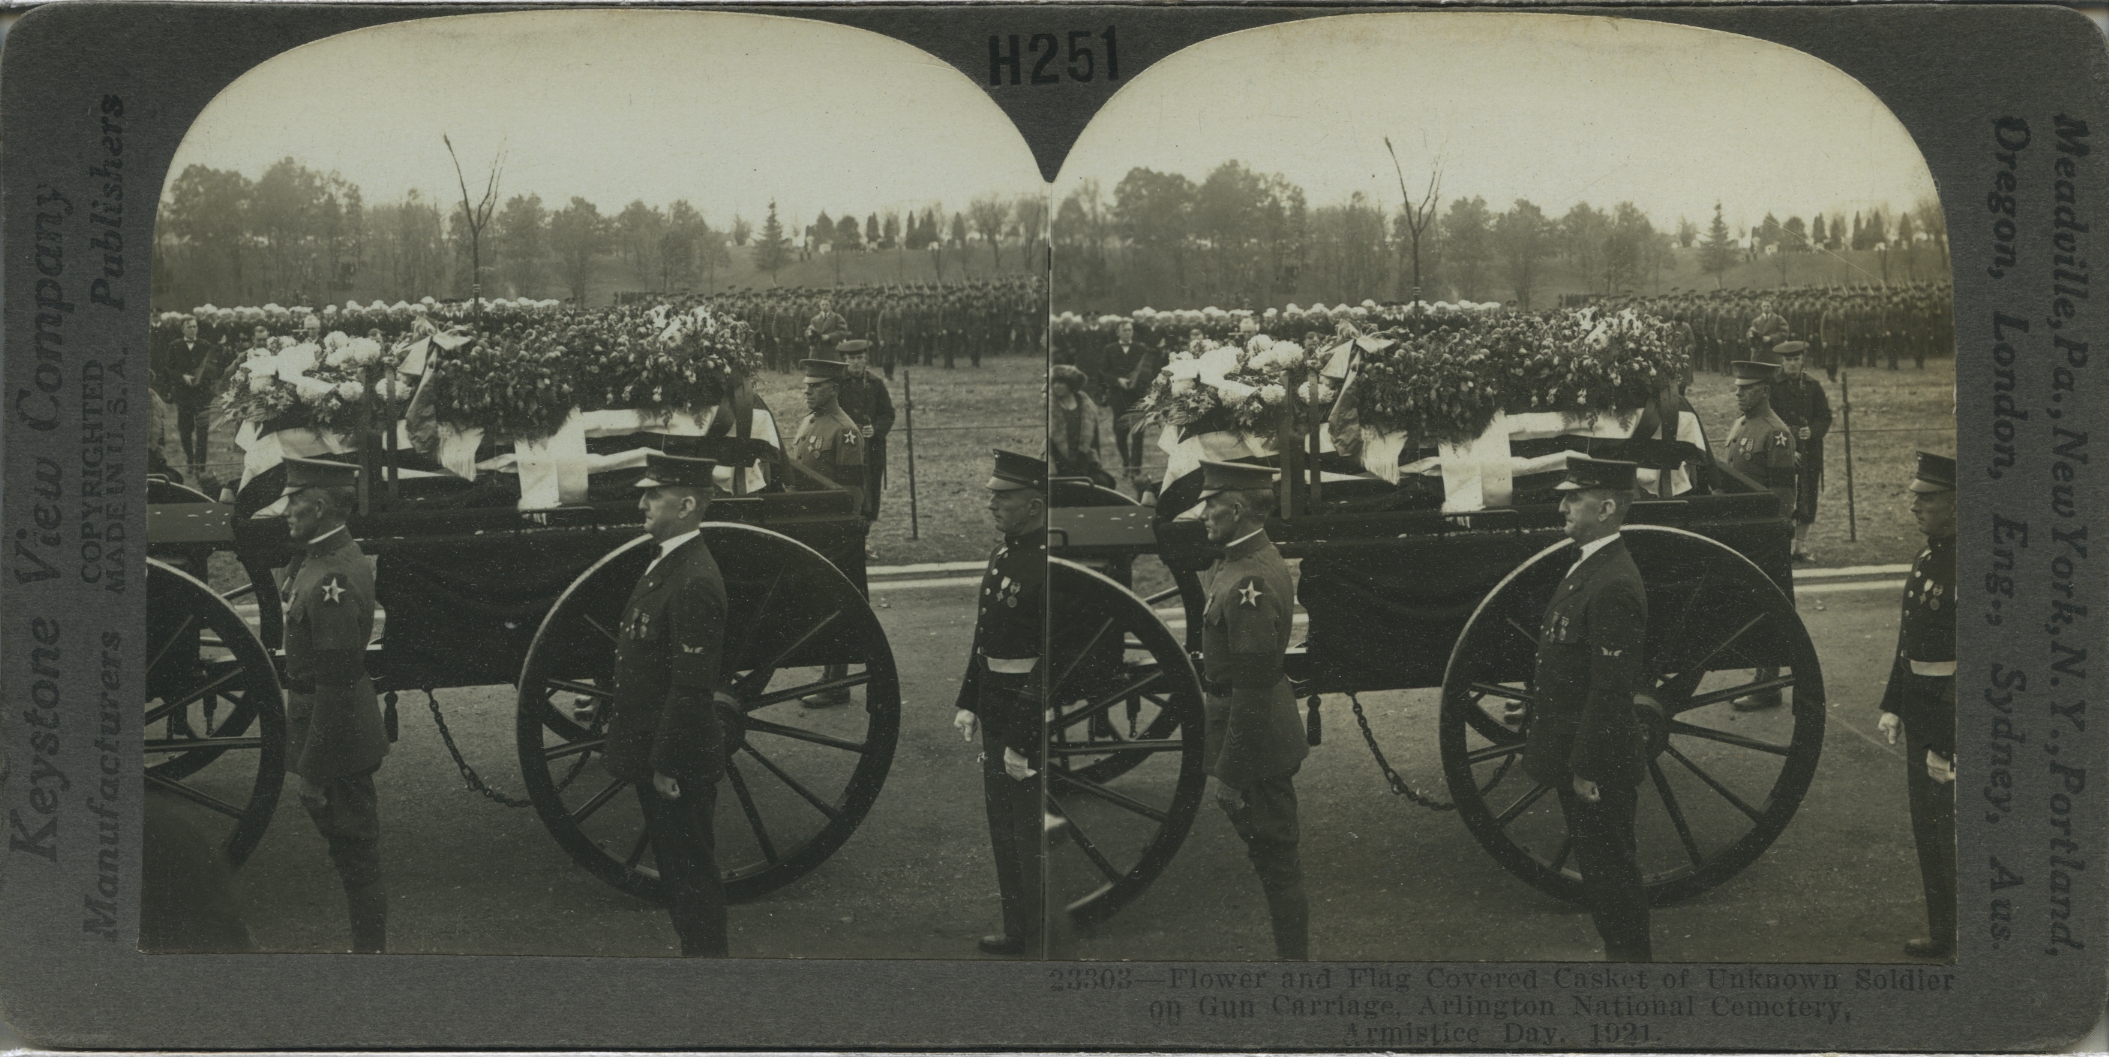 Flower and Flag Covered Casket of Unknown Soldier on Gun Carriage, Arlington National Cemetery, Armistice Day, 1921